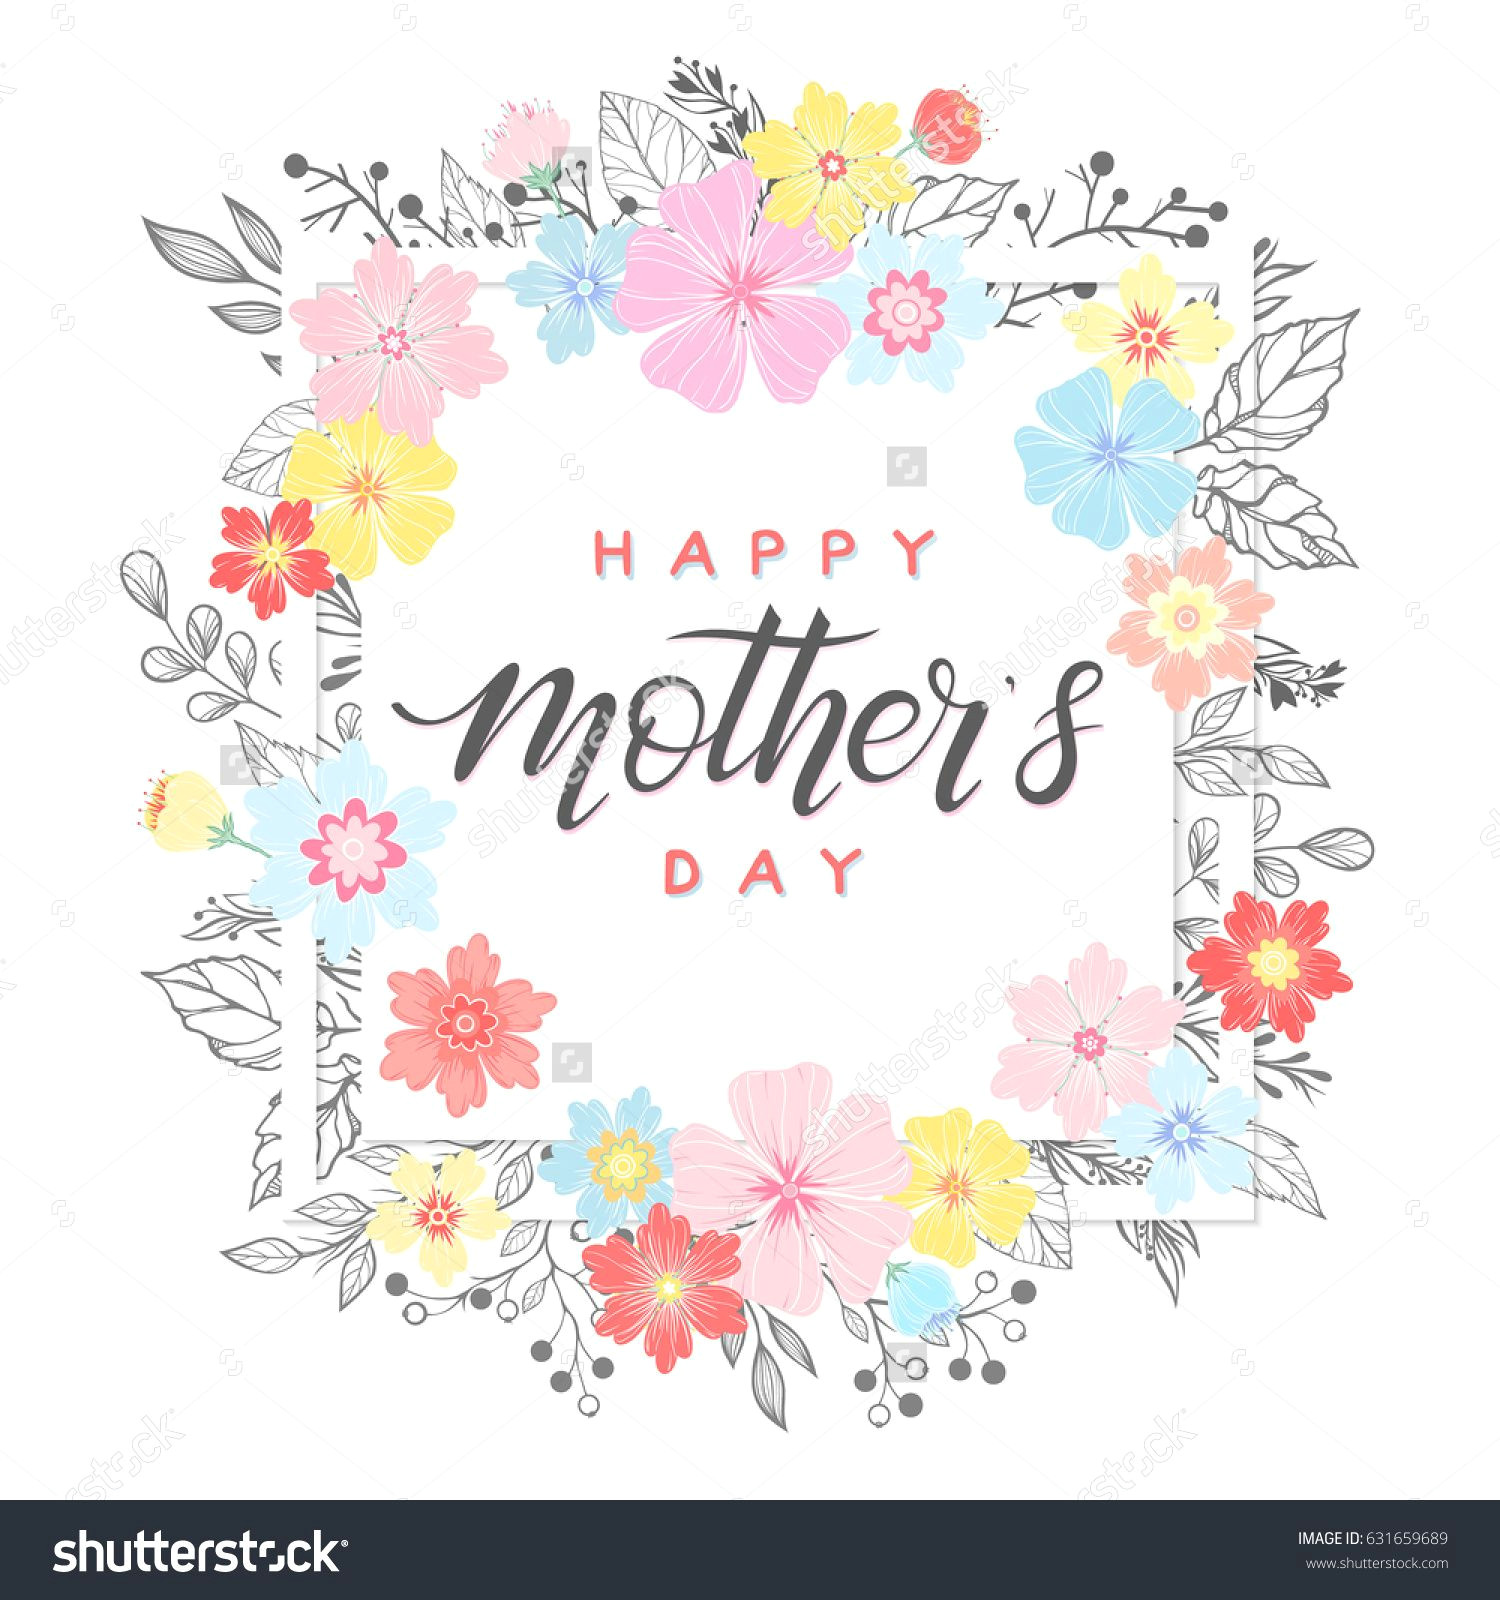 Drawings Of Flowers for Mother S Day Happy Mothers Day Typography Happy Mothers Day Hand Drawn